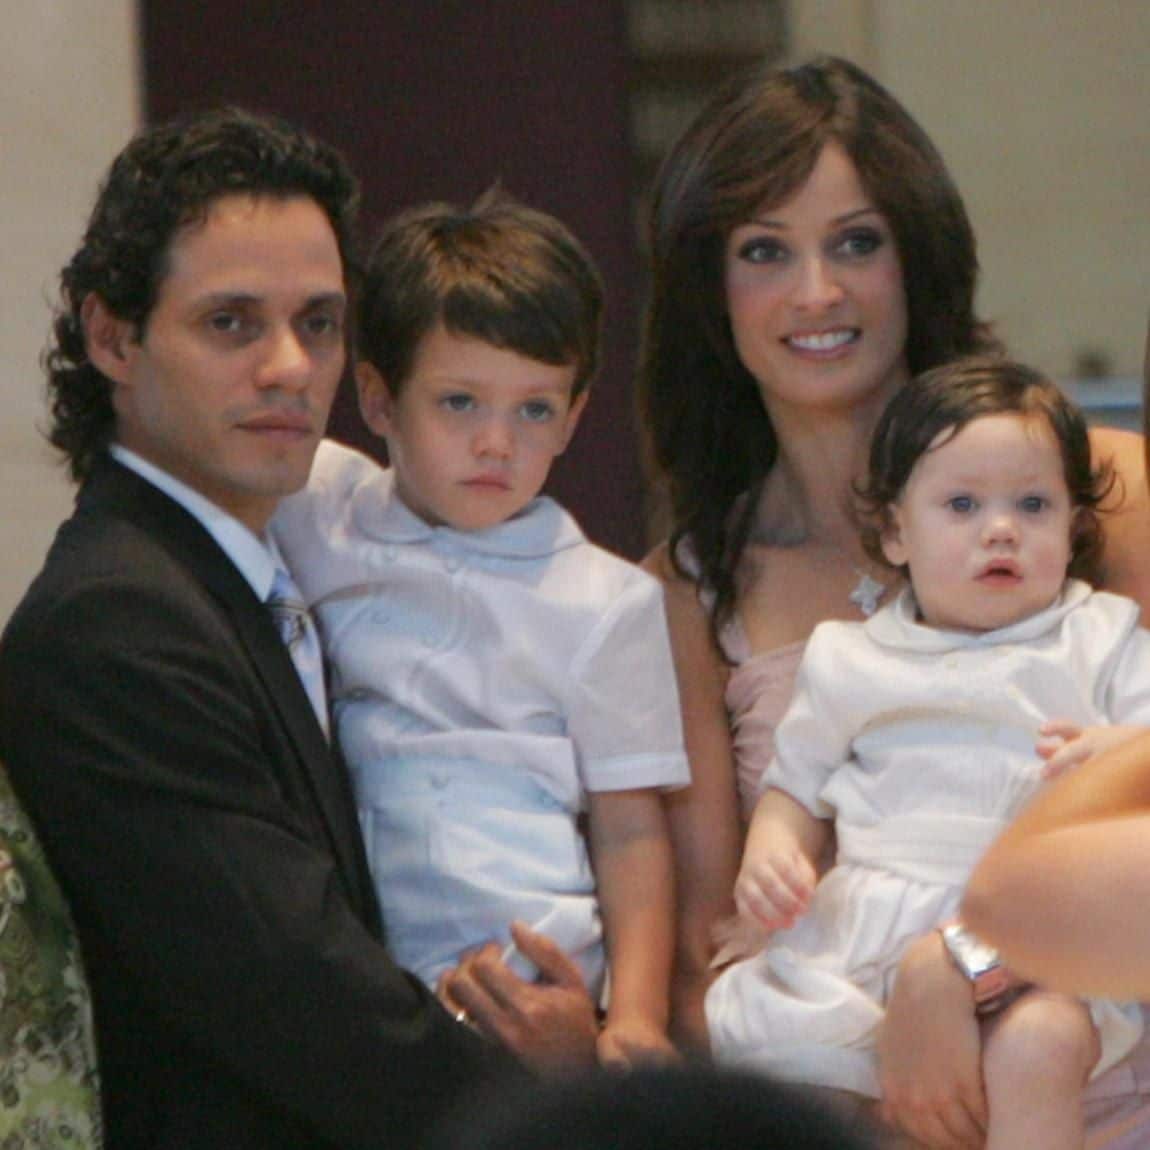 The Baptism of Marc Anthony and Dayanara Torres' Son